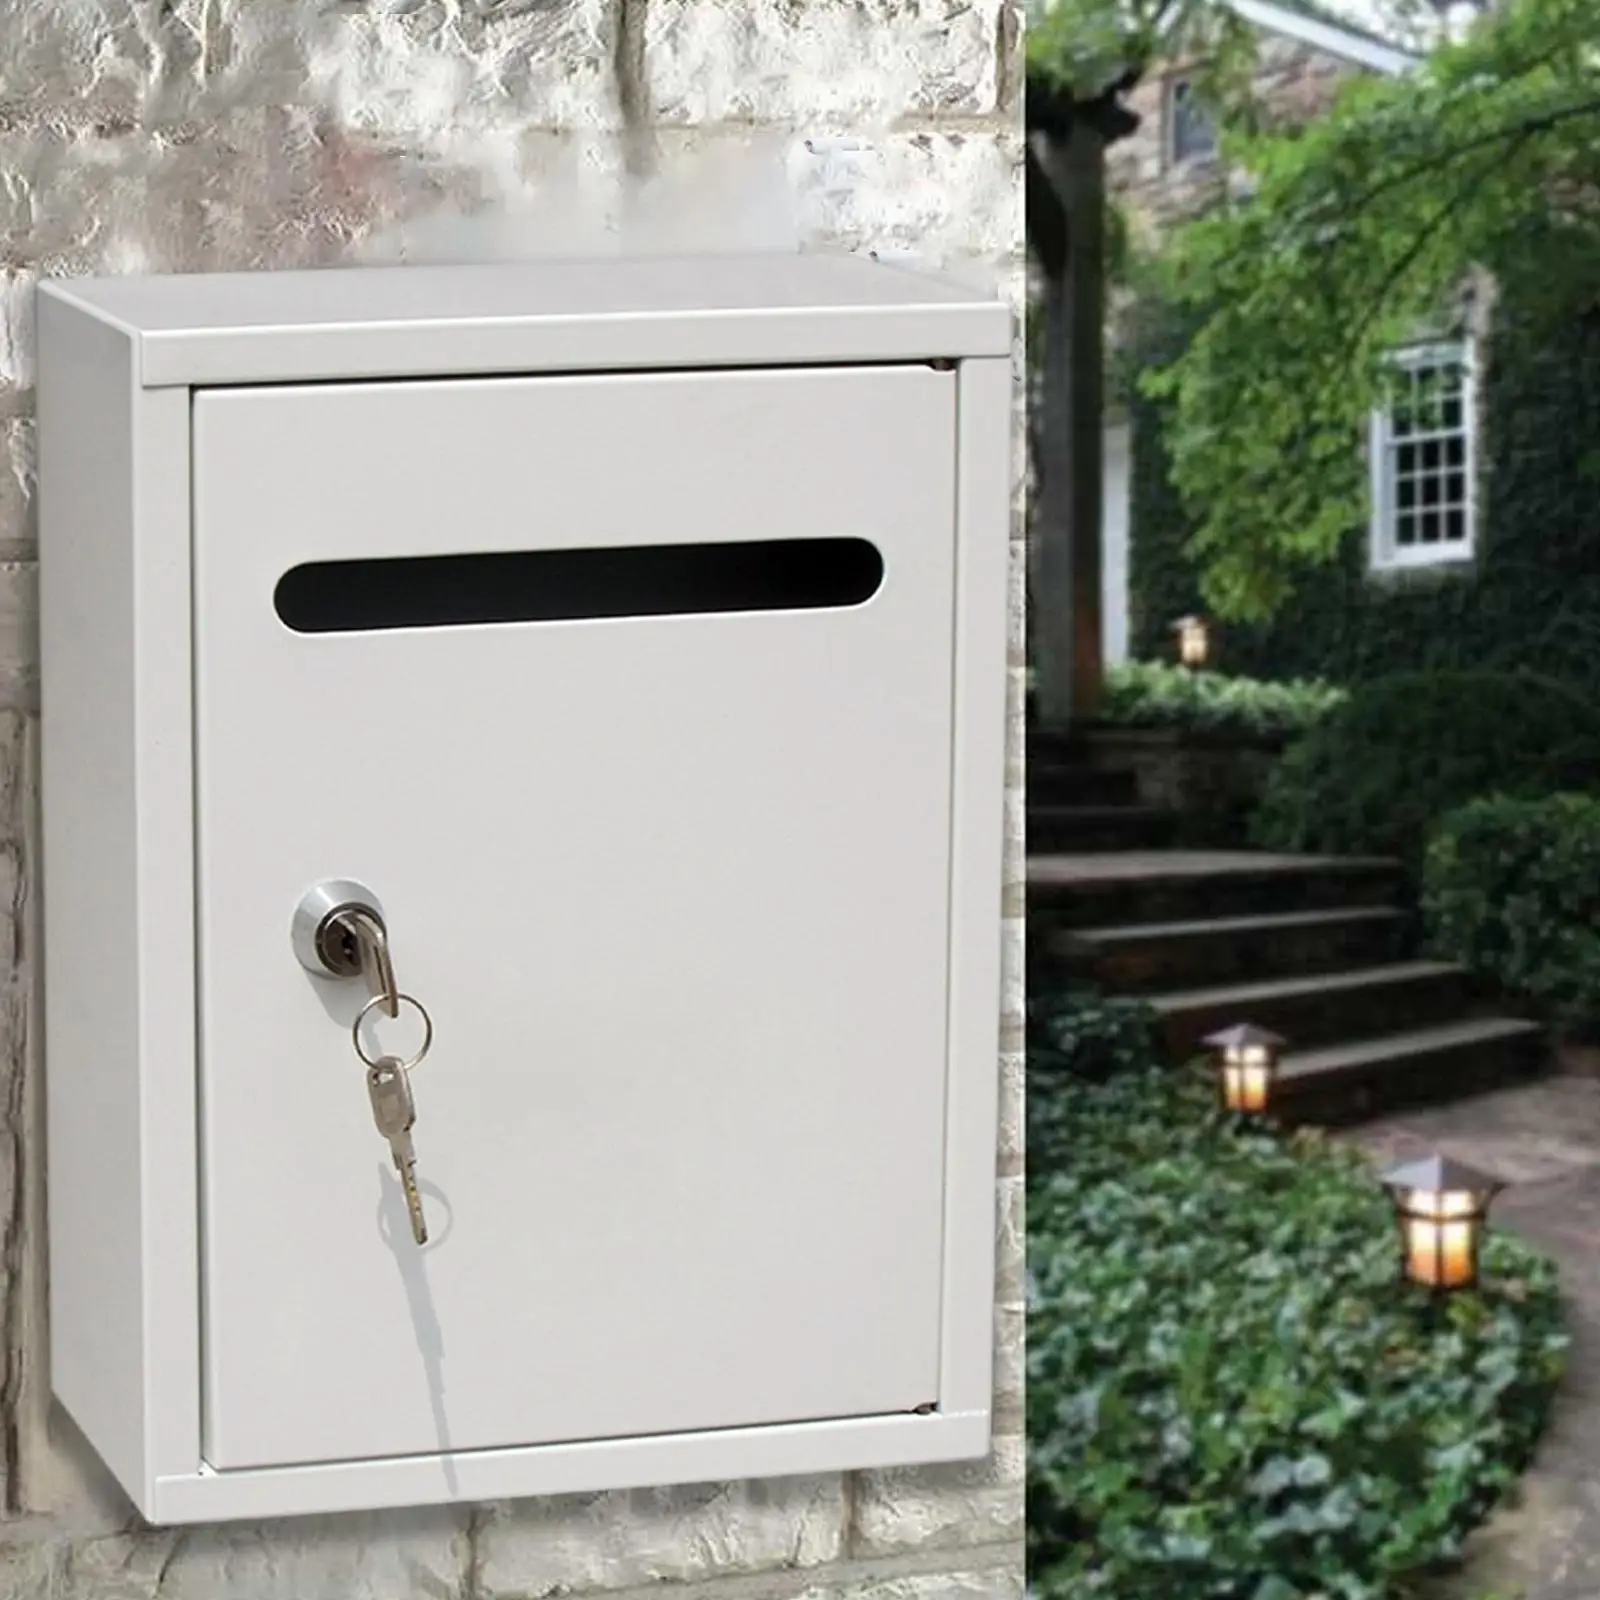 Mailbox Key Lock Wall Mount Drop Box with 2 Keys Secured Safe Suggestion Box Collection Boxes Letterbox Mail Box